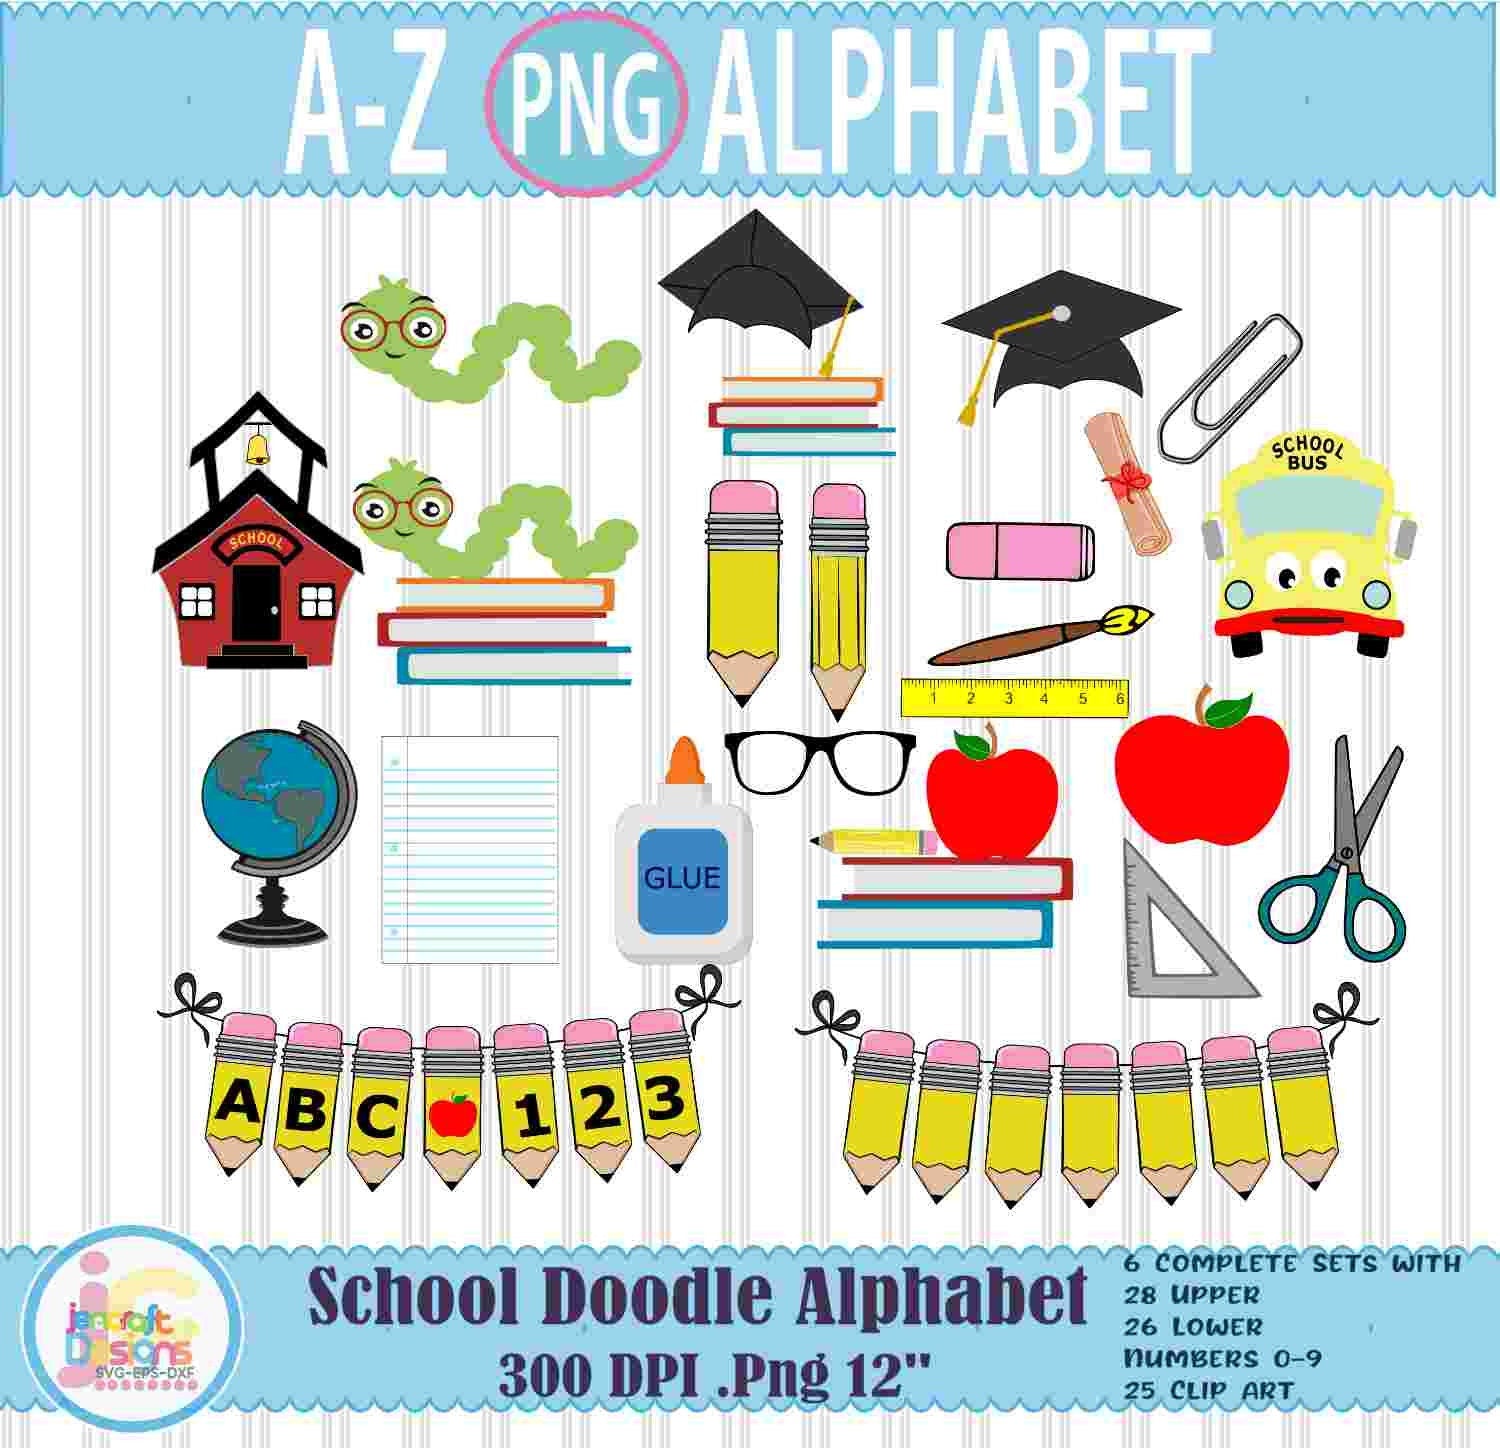 Back to School Doodle letters Alphabet Png Print File for Sublimation or Printing - JenCraft Designs